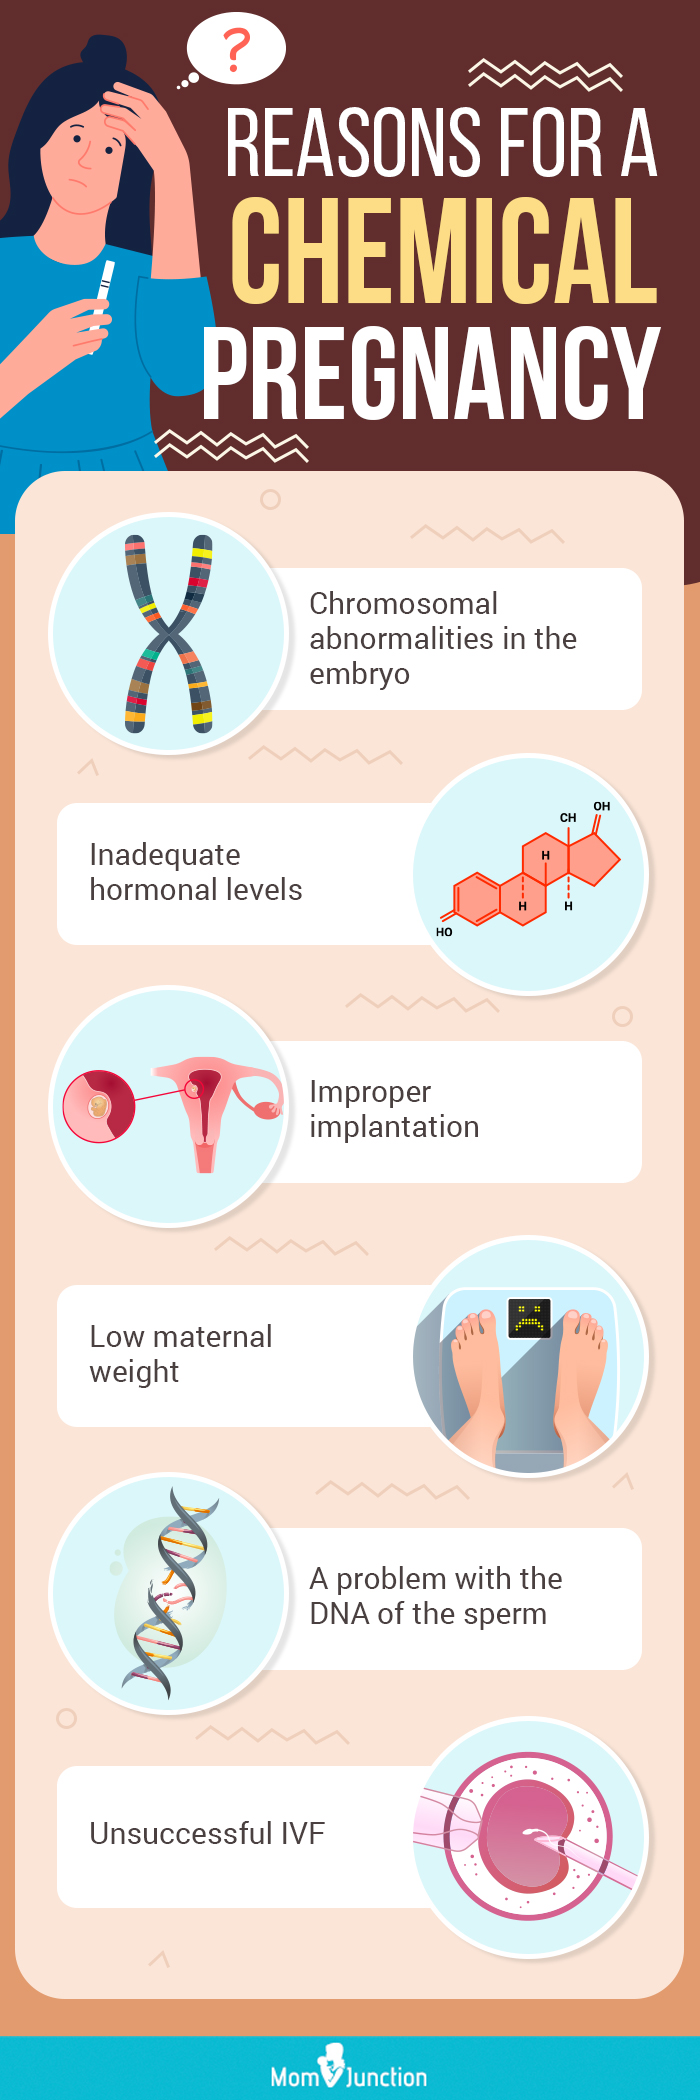 reasons for a chemical pregnancy (infographic)